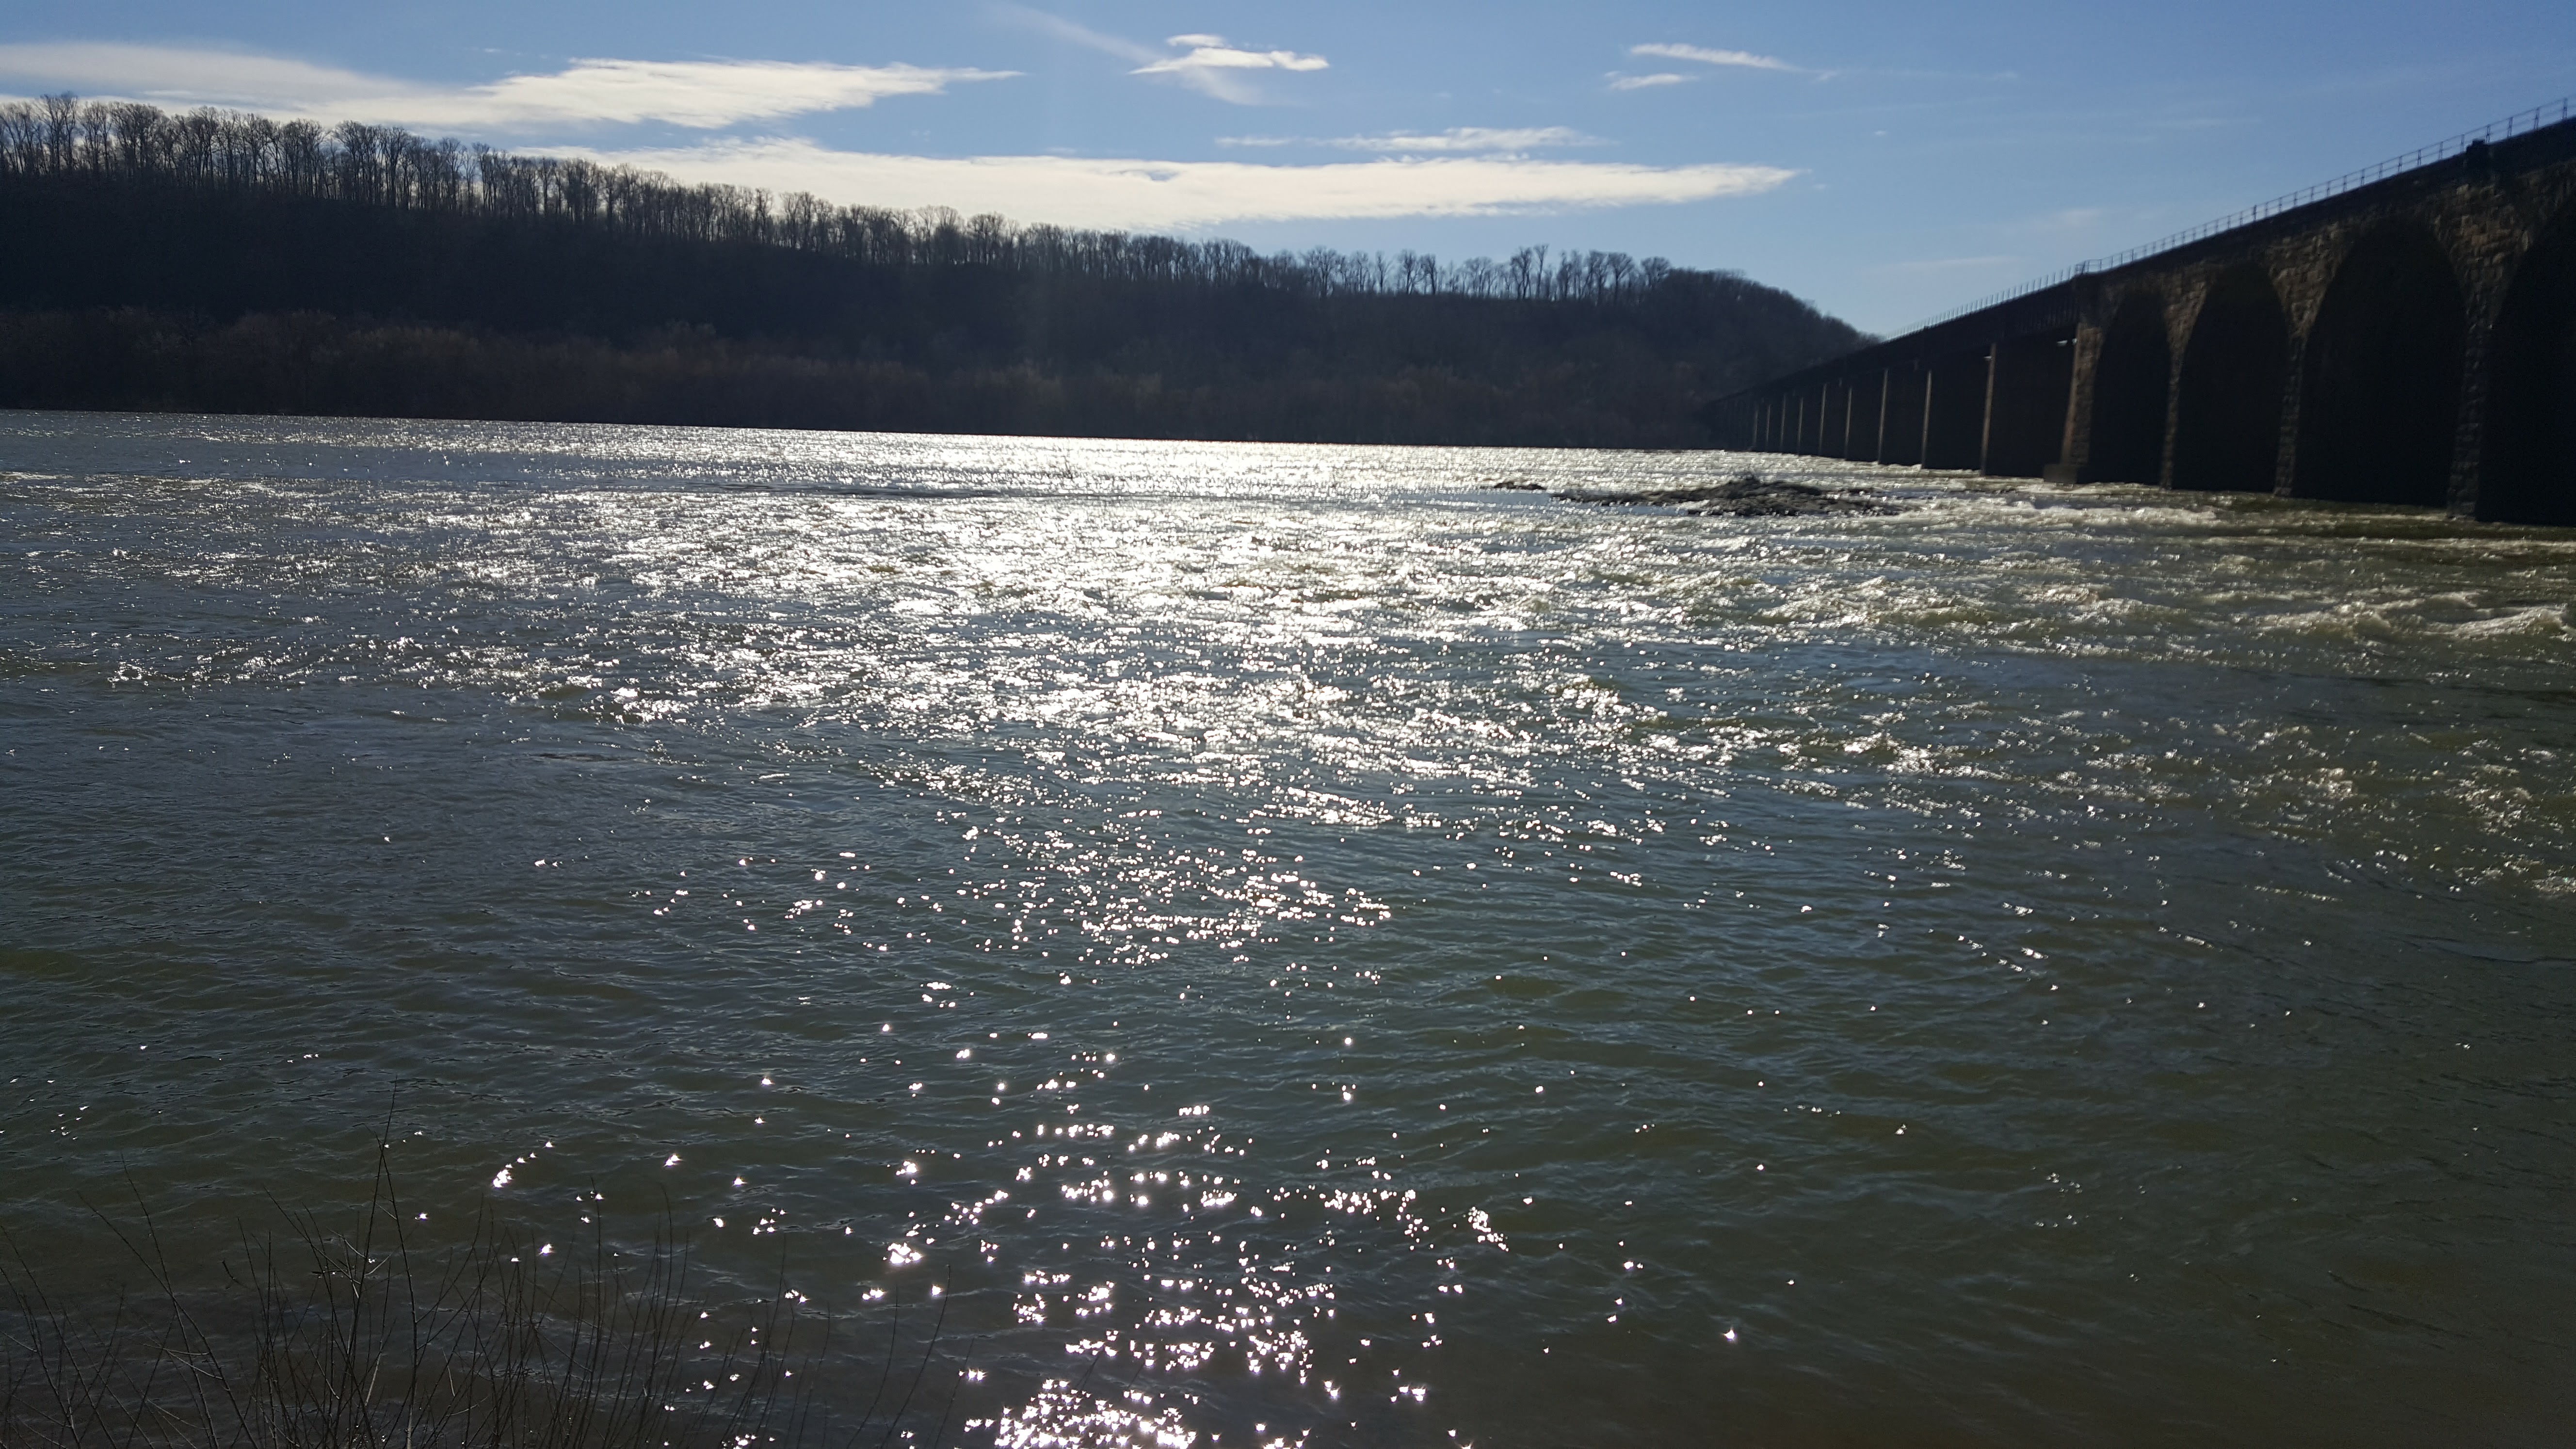 This is a picture of bright sunshine reflecting off of the Susquehanna River near the historic Shocks Mills railroad bridge.